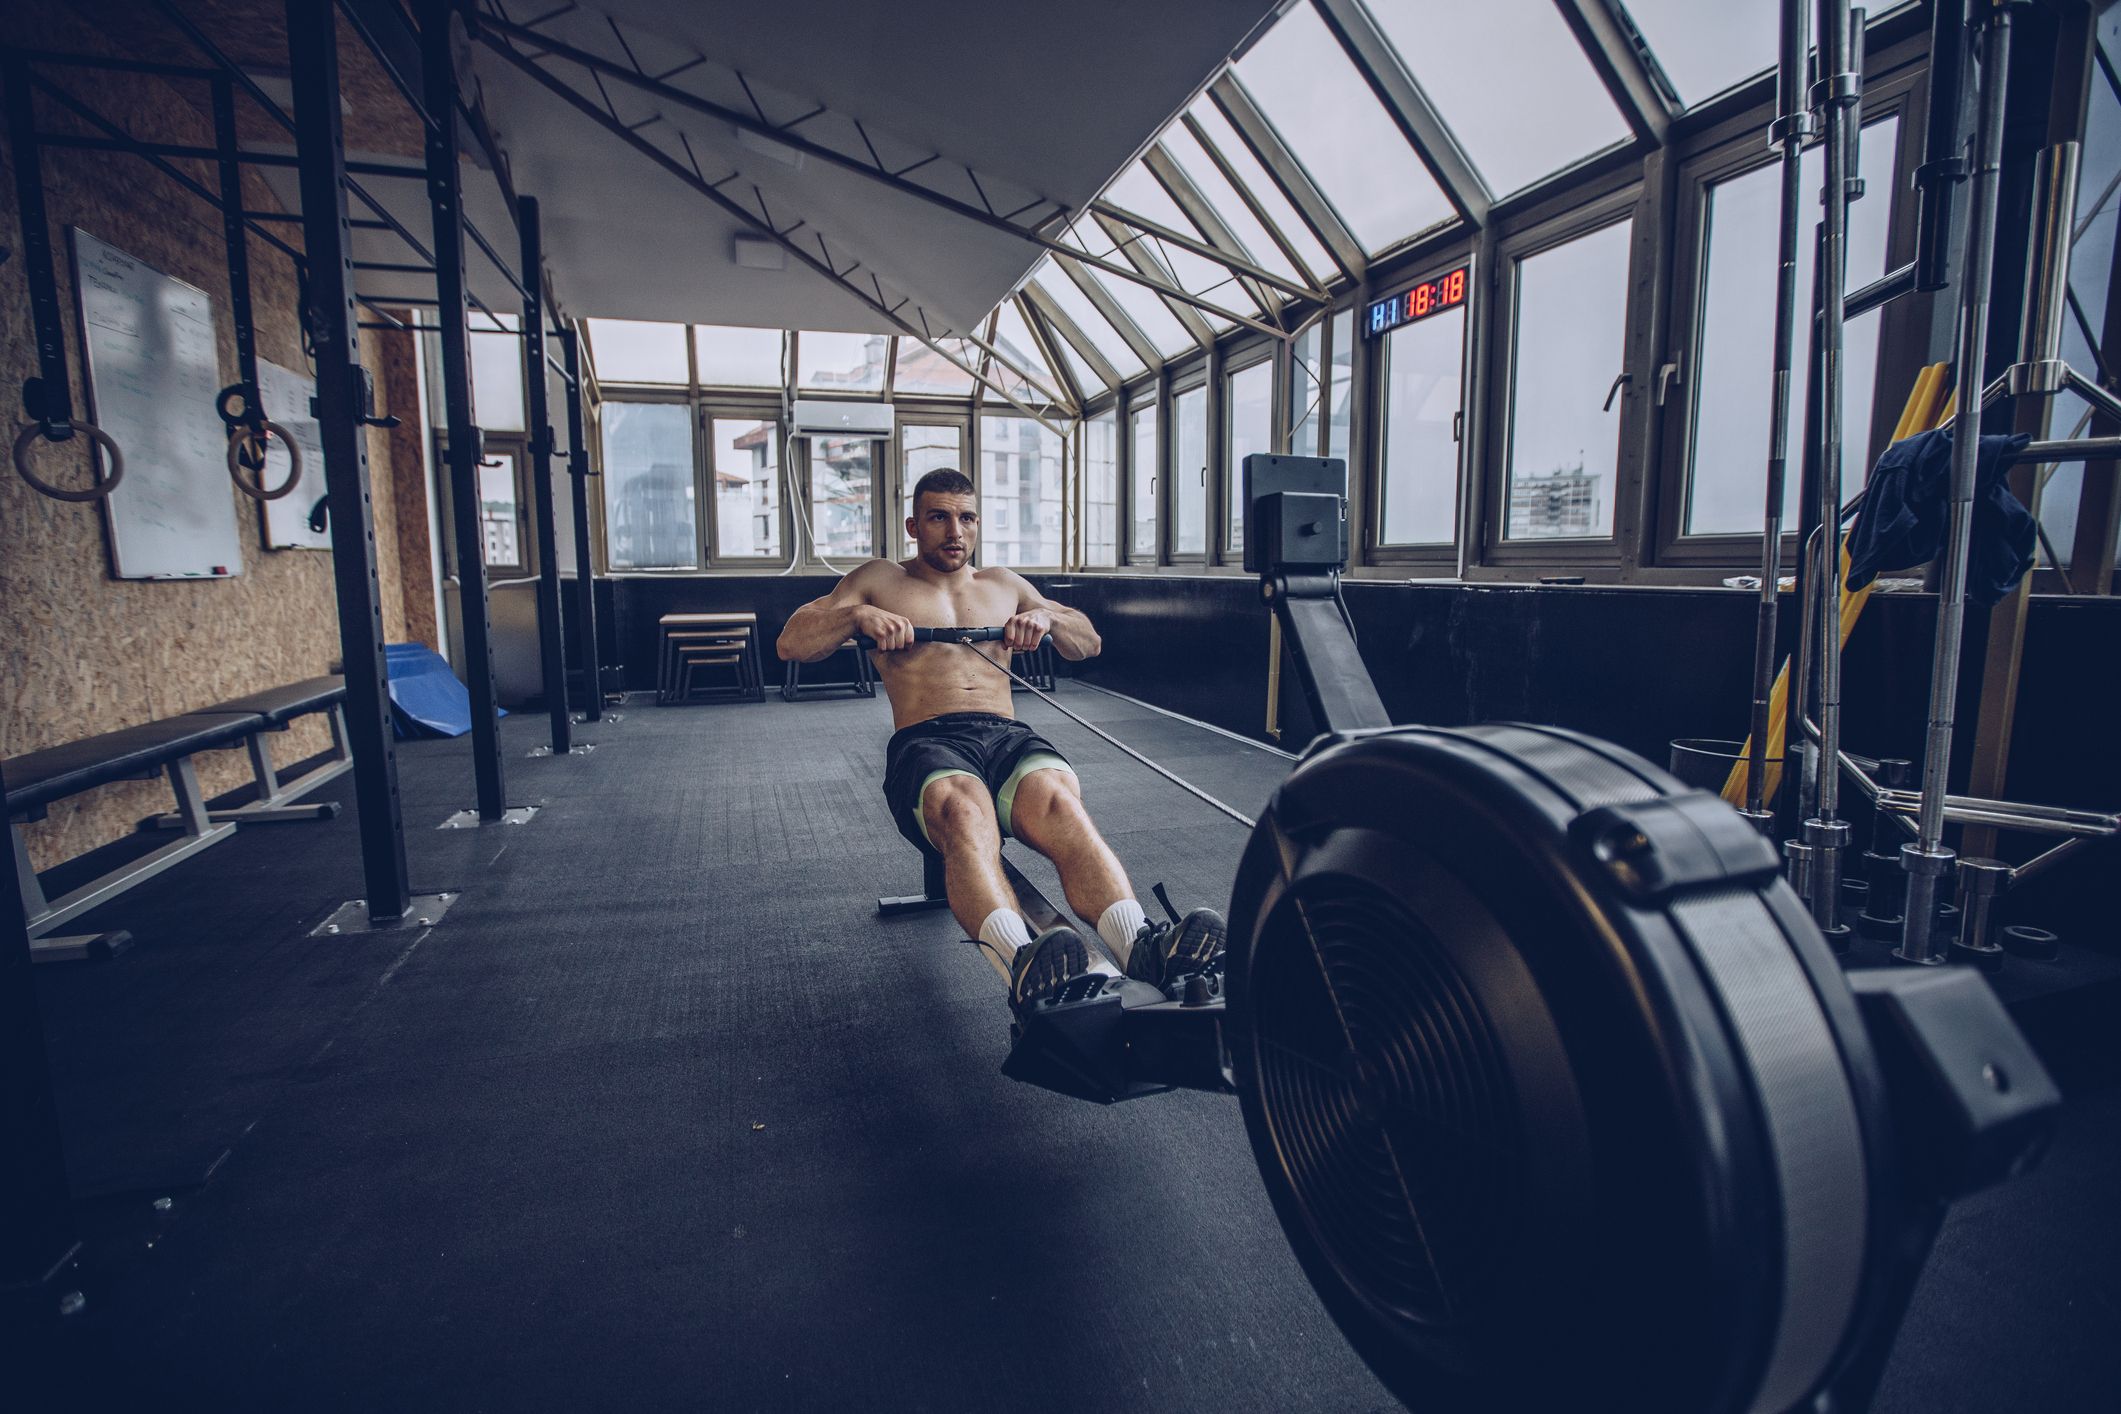 Rowing Machine Benefits — Rowing Workouts for Strength and